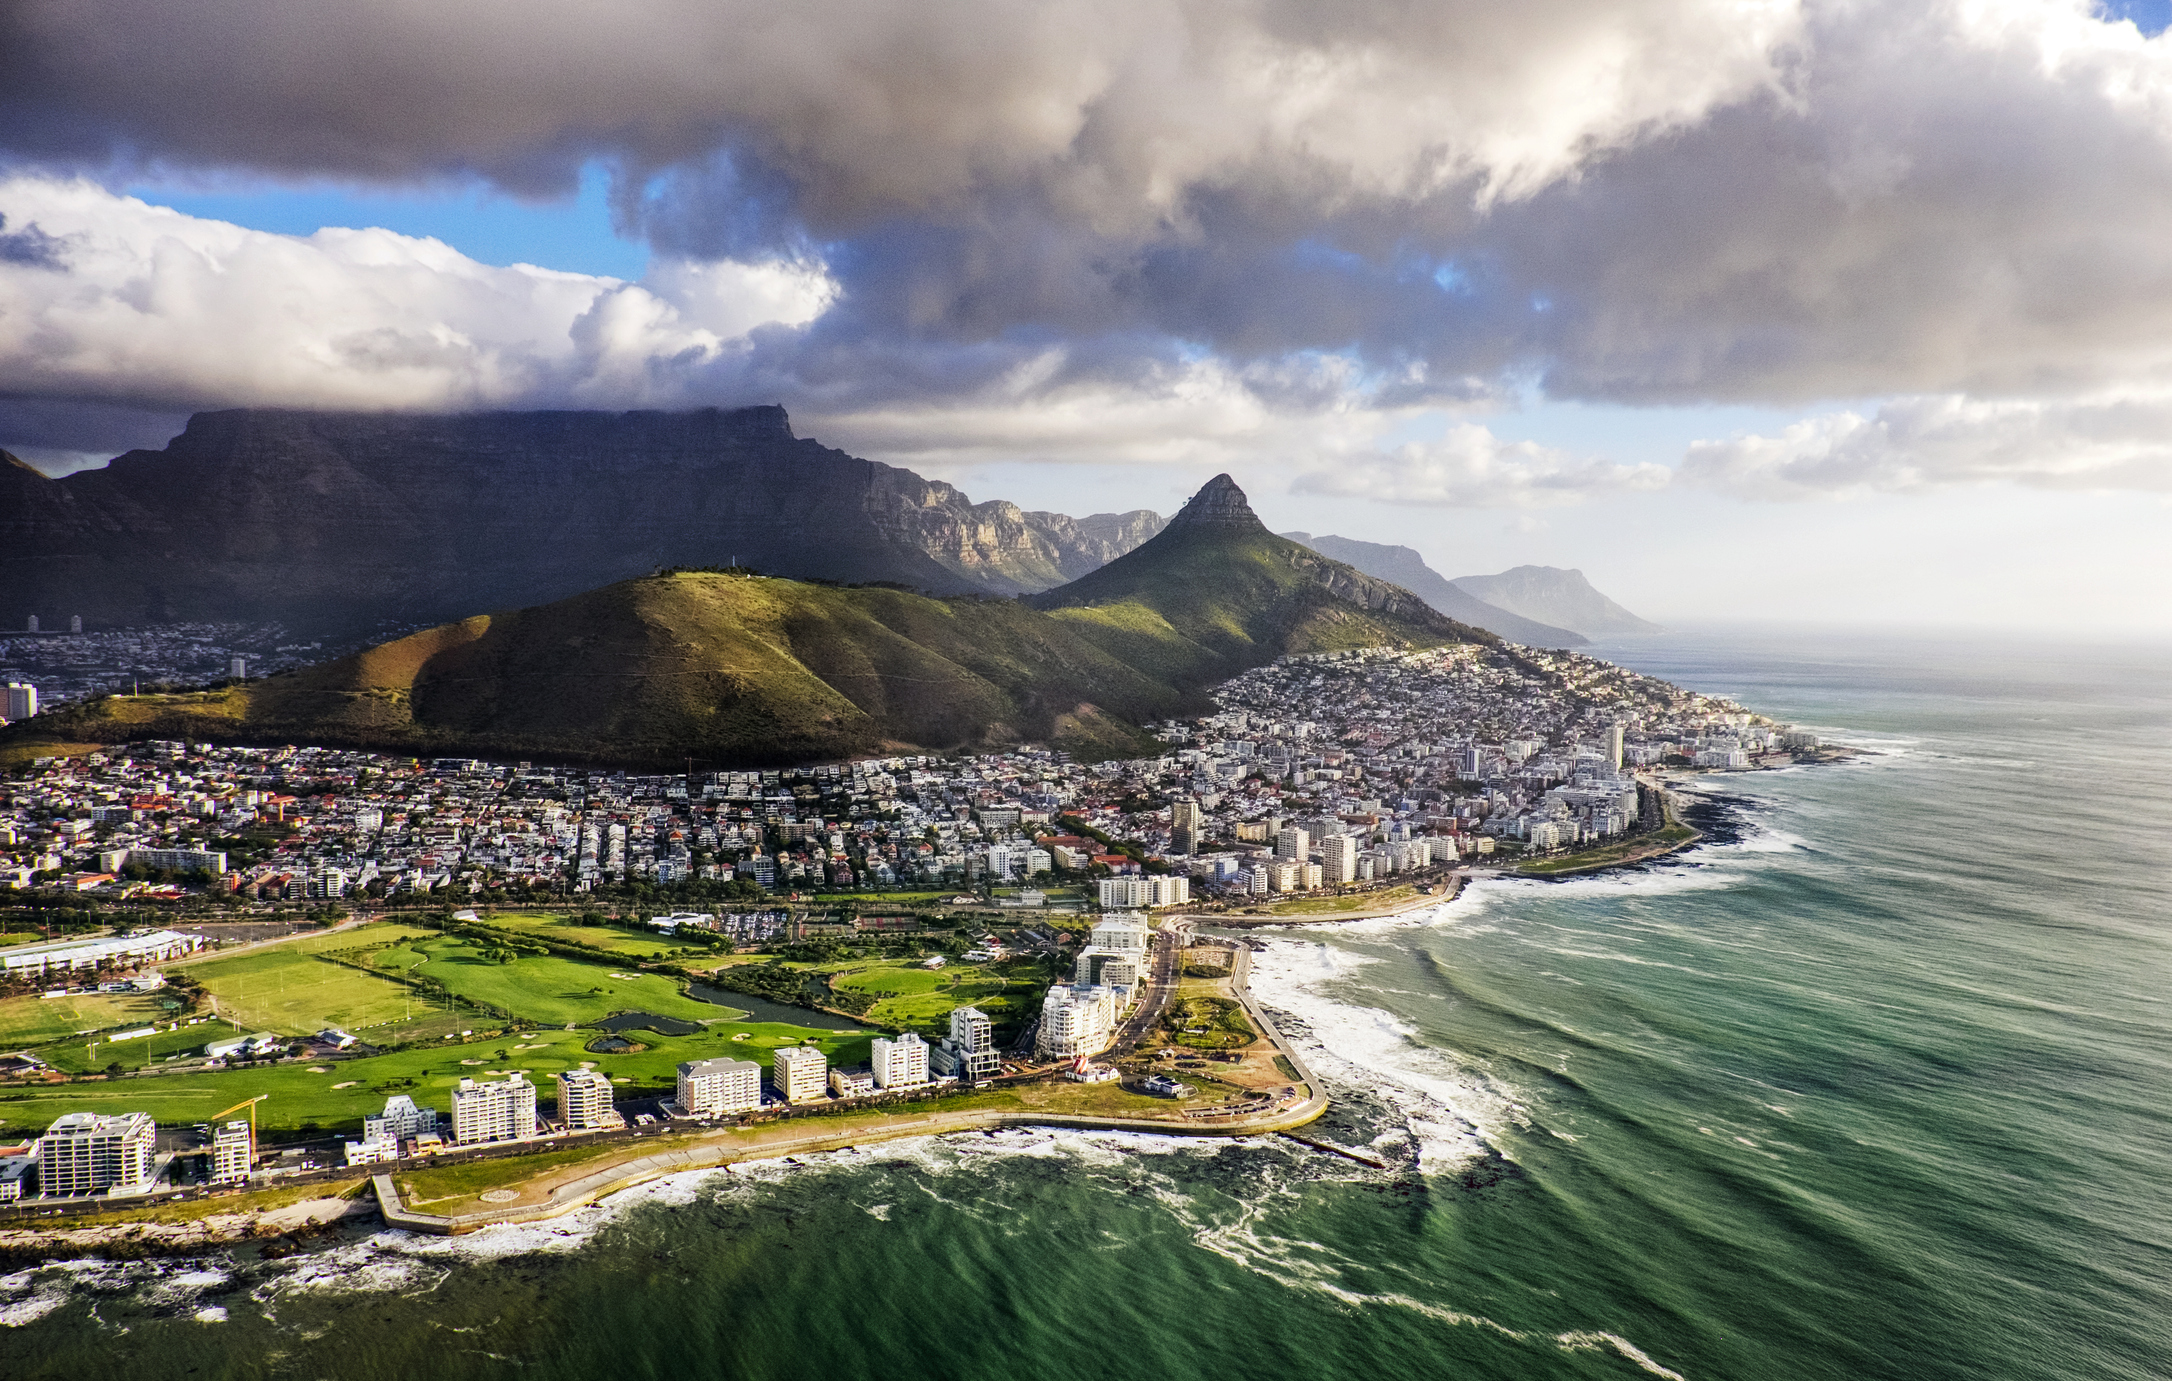 Direct Flights To Cape Town: United Becomes The First US Airlines To Provide Nonstop Flights From Washington D.C.